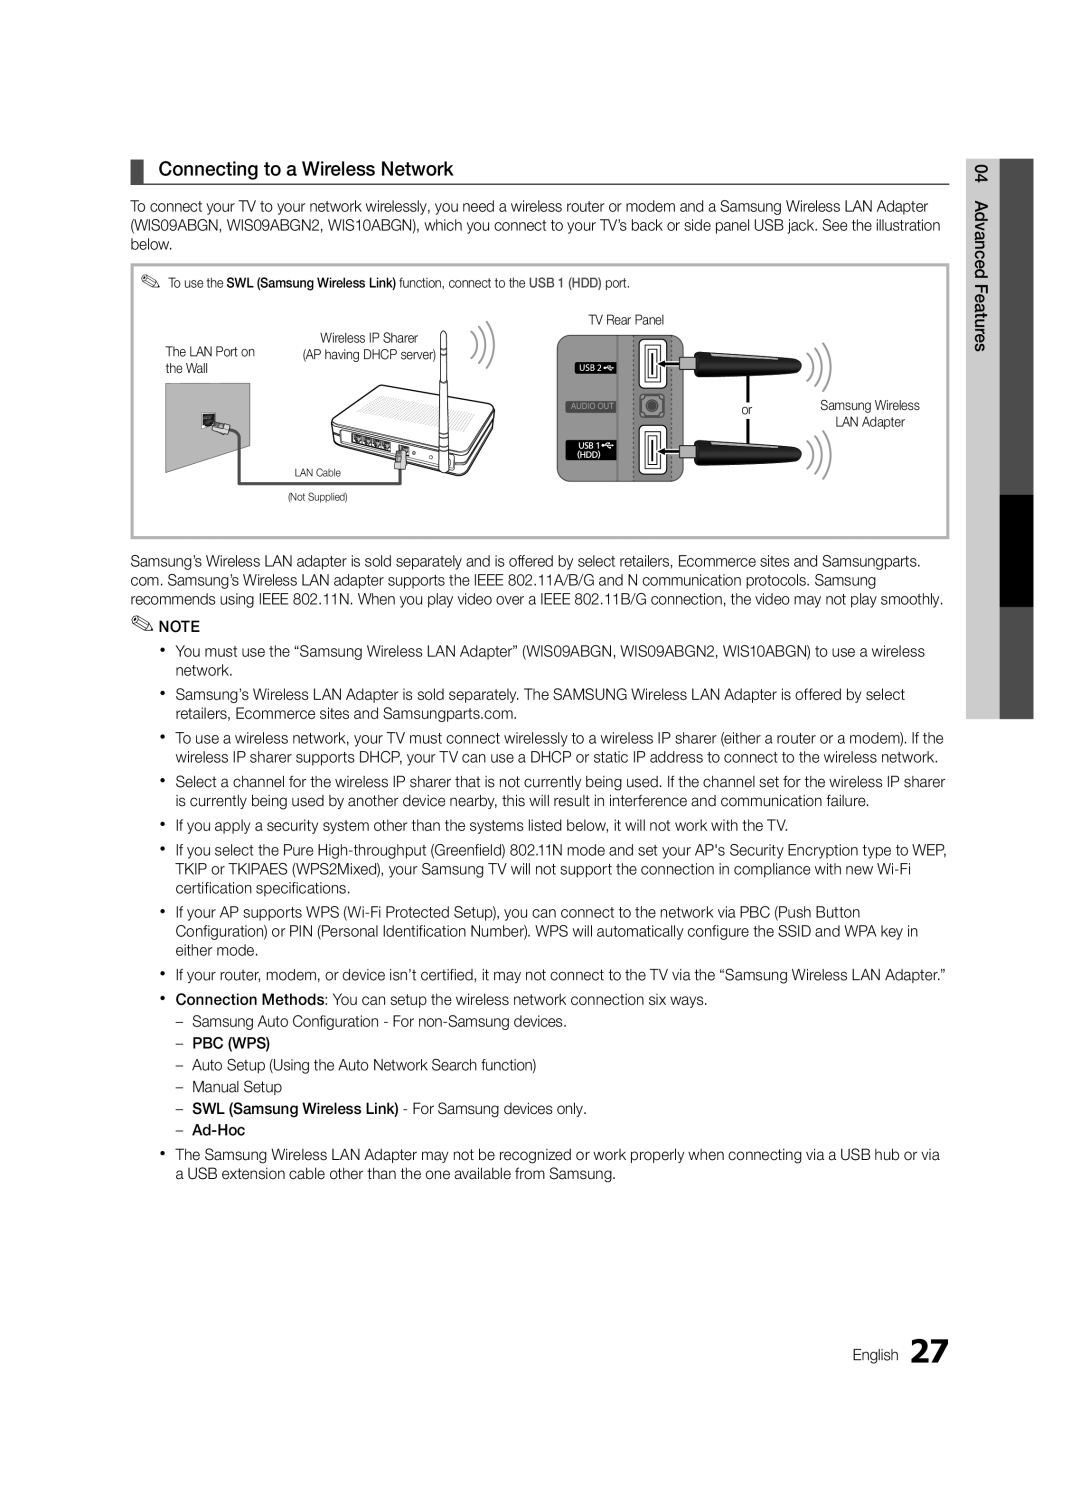 Samsung UC5000-ZC, BN68-03004B-02 user manual Connecting to a Wireless Network, Samsung Wireless, LAN Adapter 